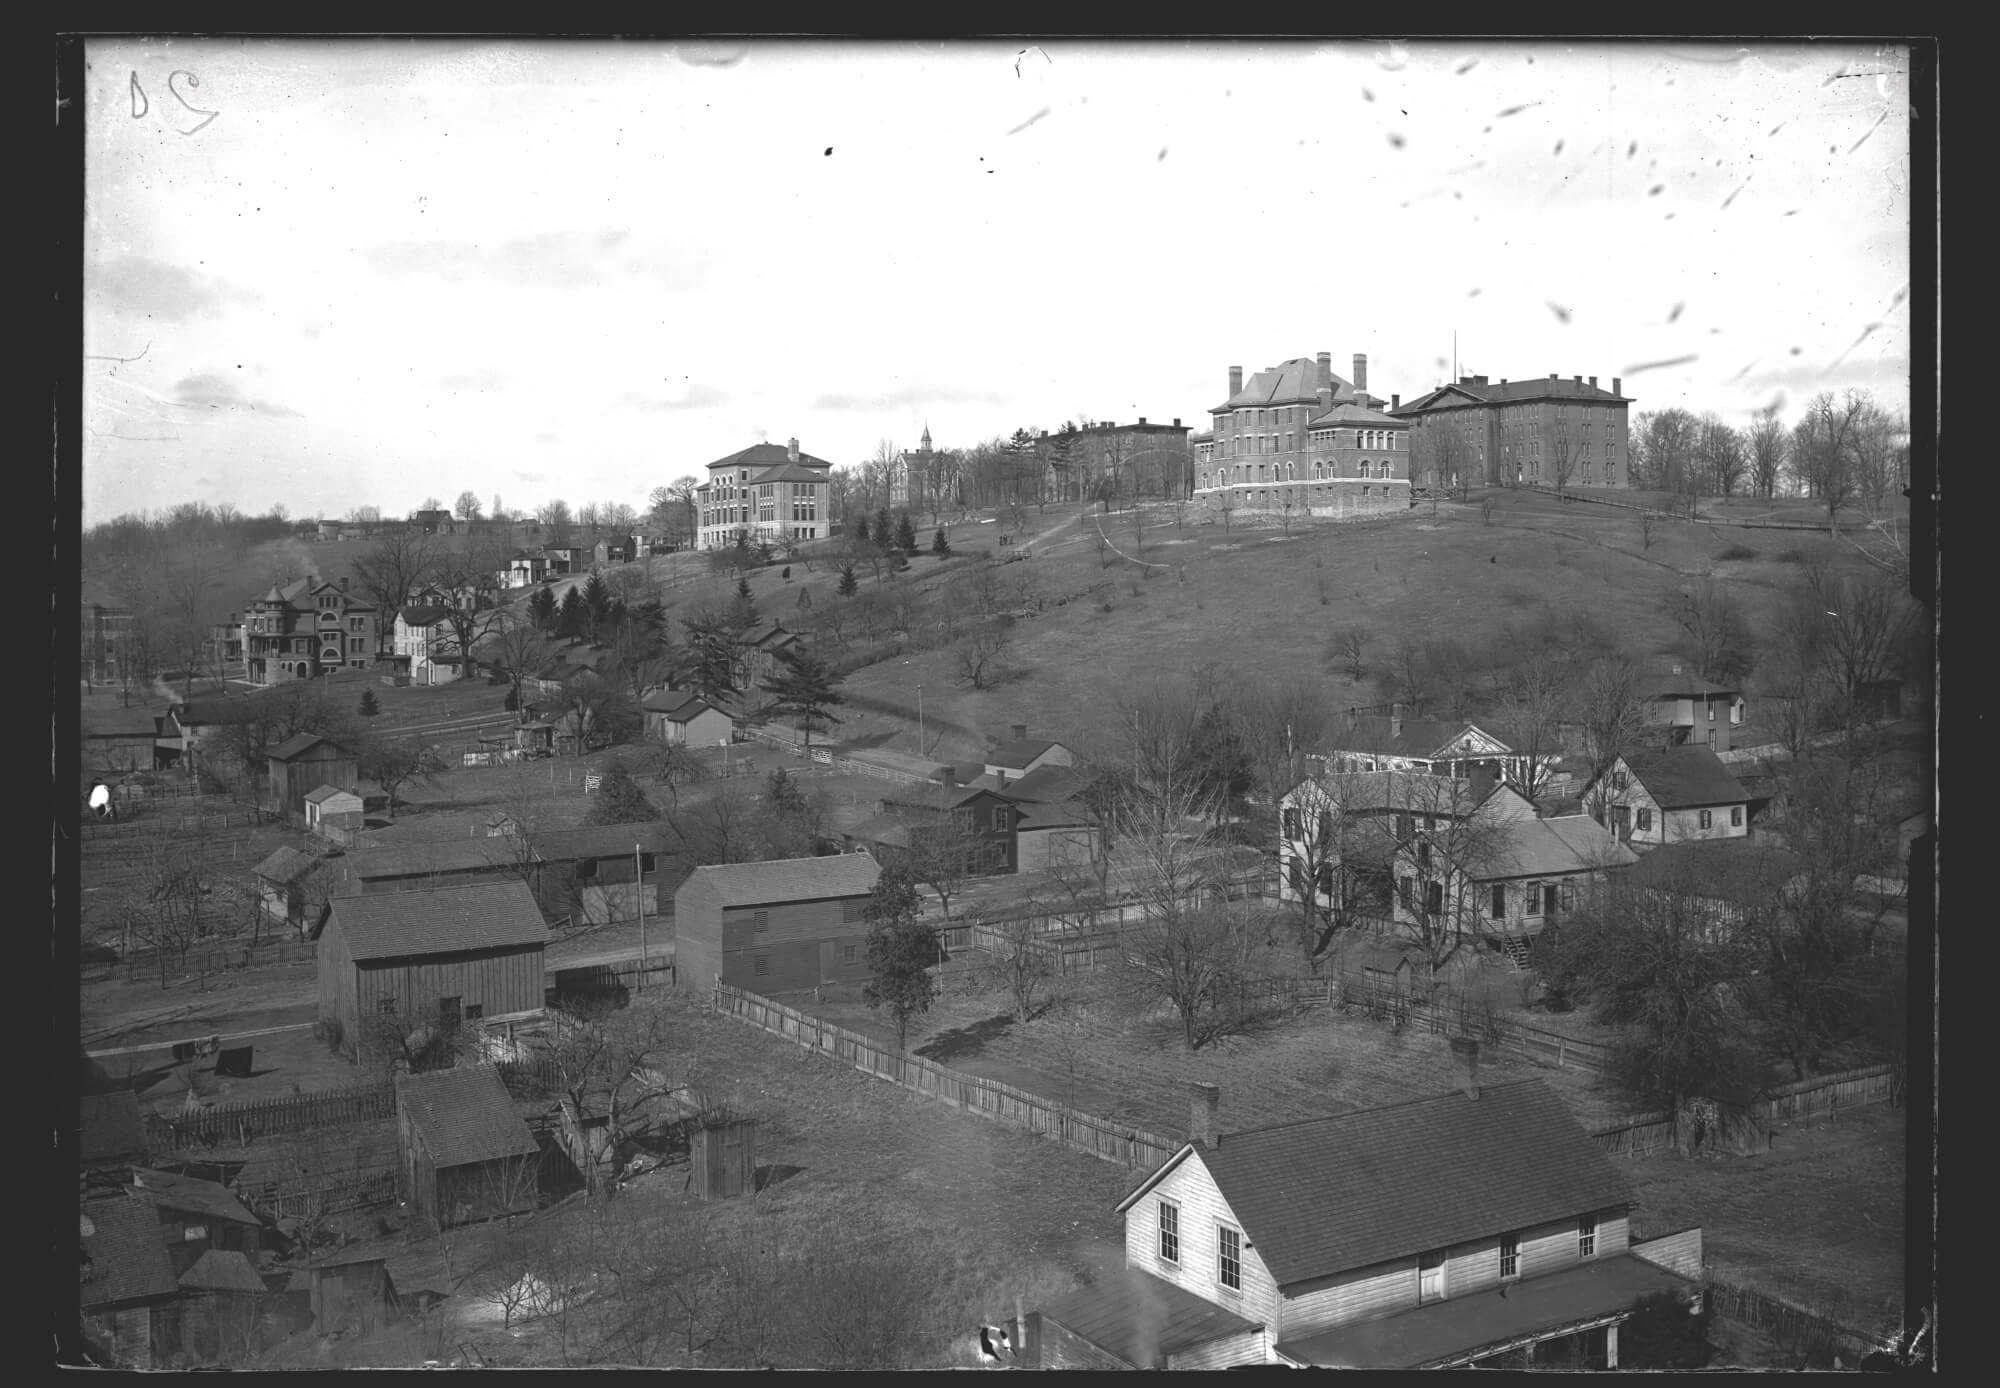 Denison Campus from the year 1895